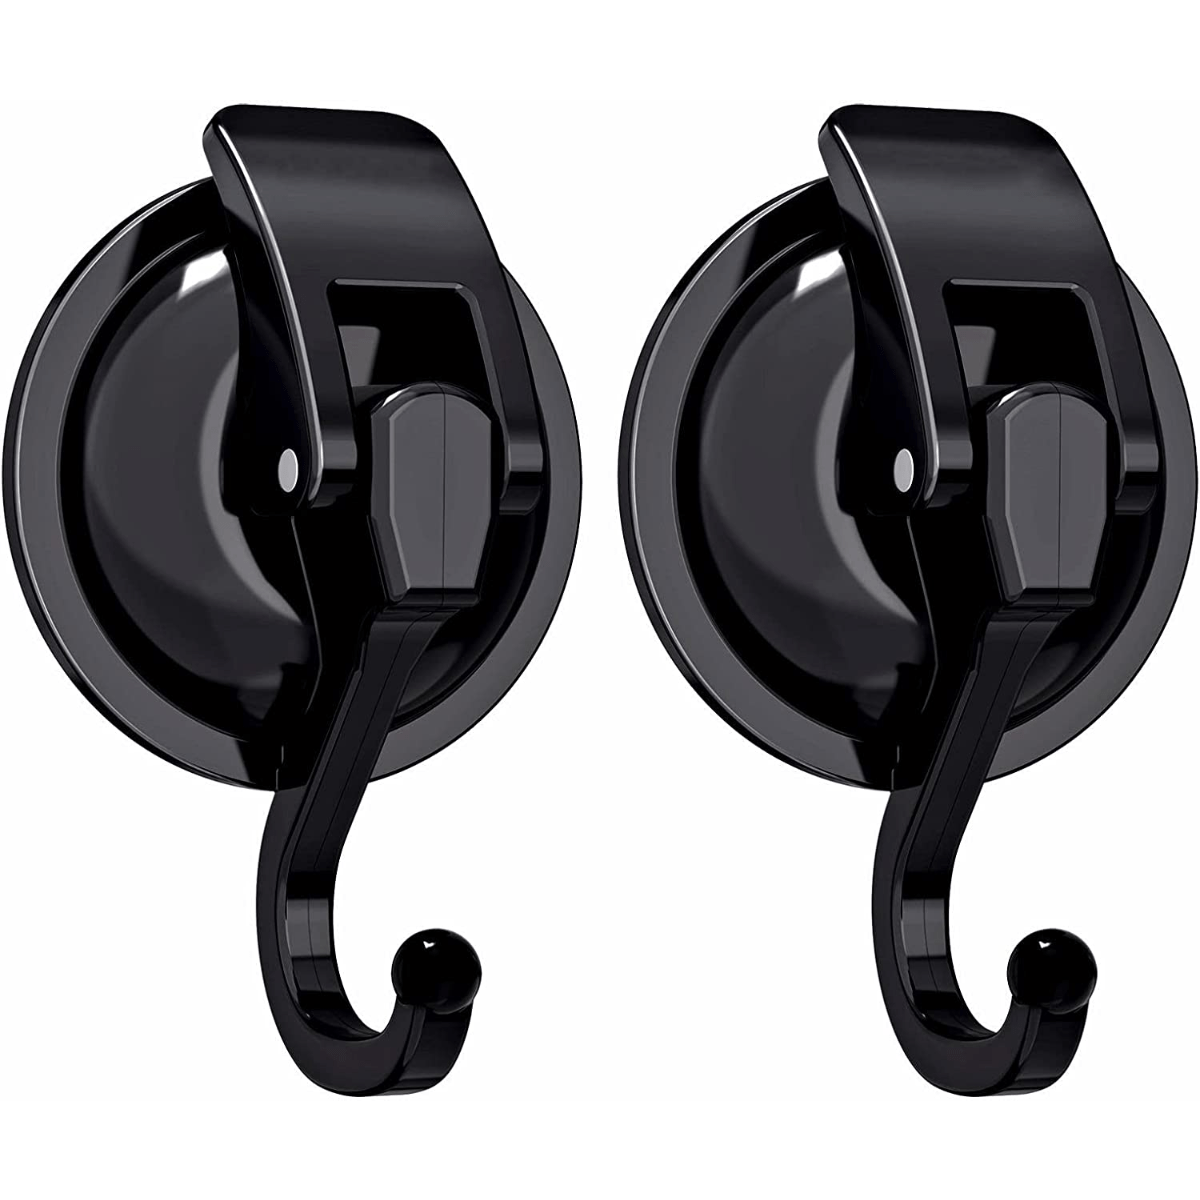 2X HEAVY DUTY Lever Suction Cup Hooks Bathroom/kitchen Holder